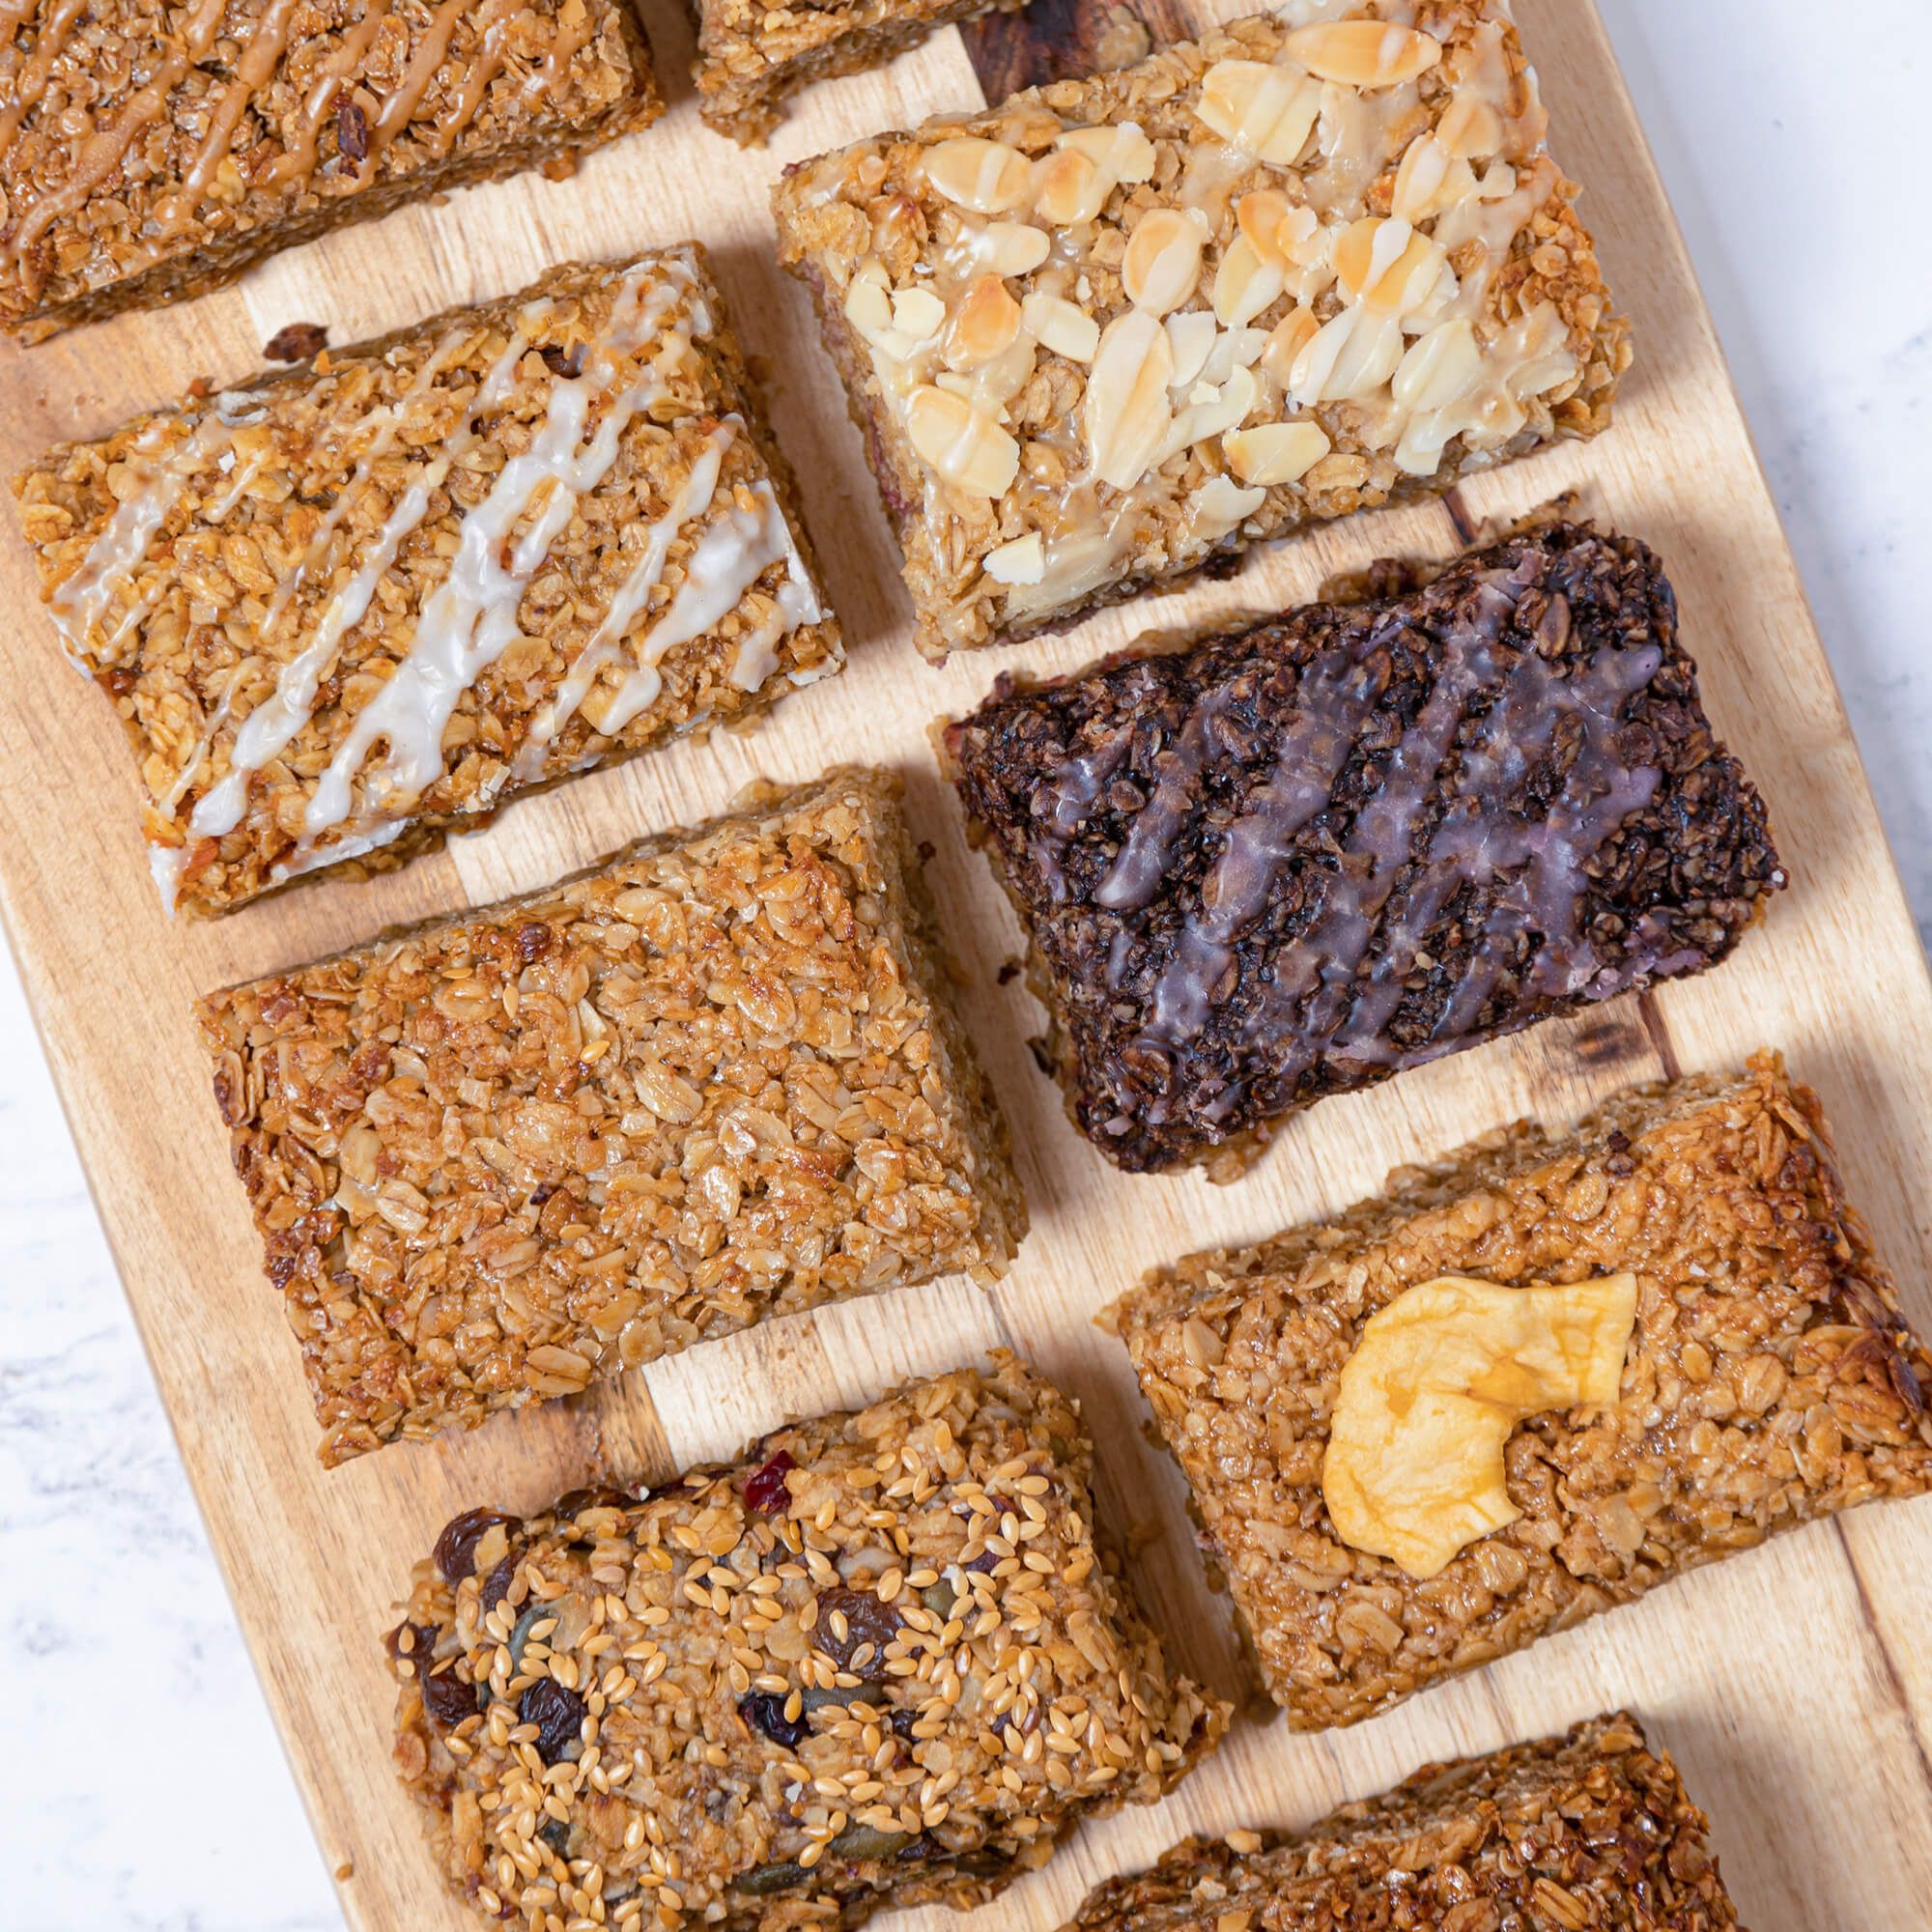 A bird’s eye view image of 8 oat-based flapjacks on a wooden cutting board. 